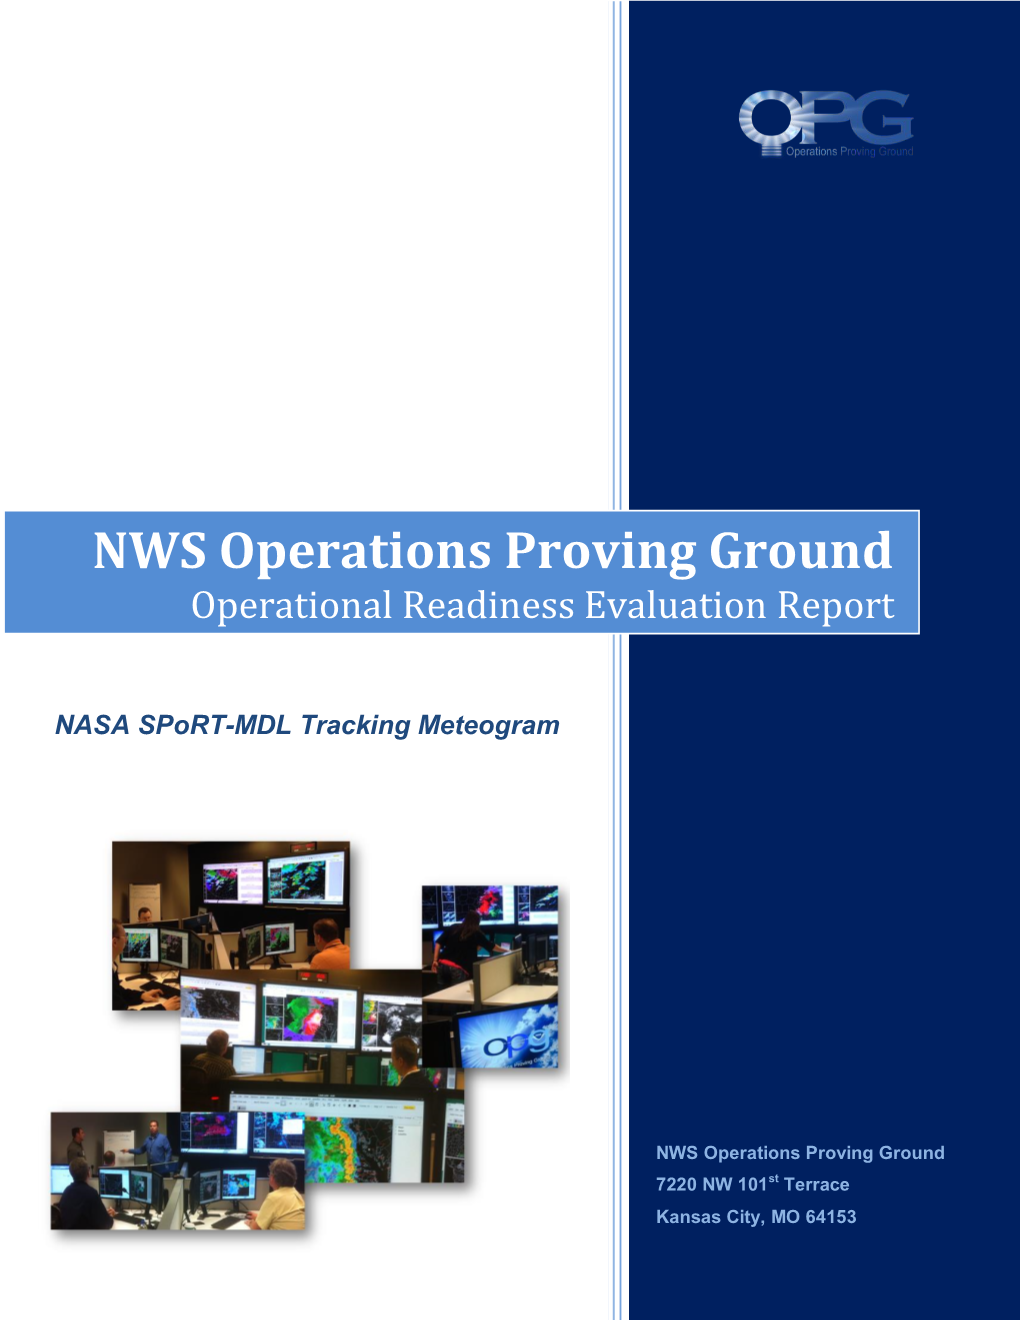 NWS Operations Proving Ground Operational Readiness Evaluation Report